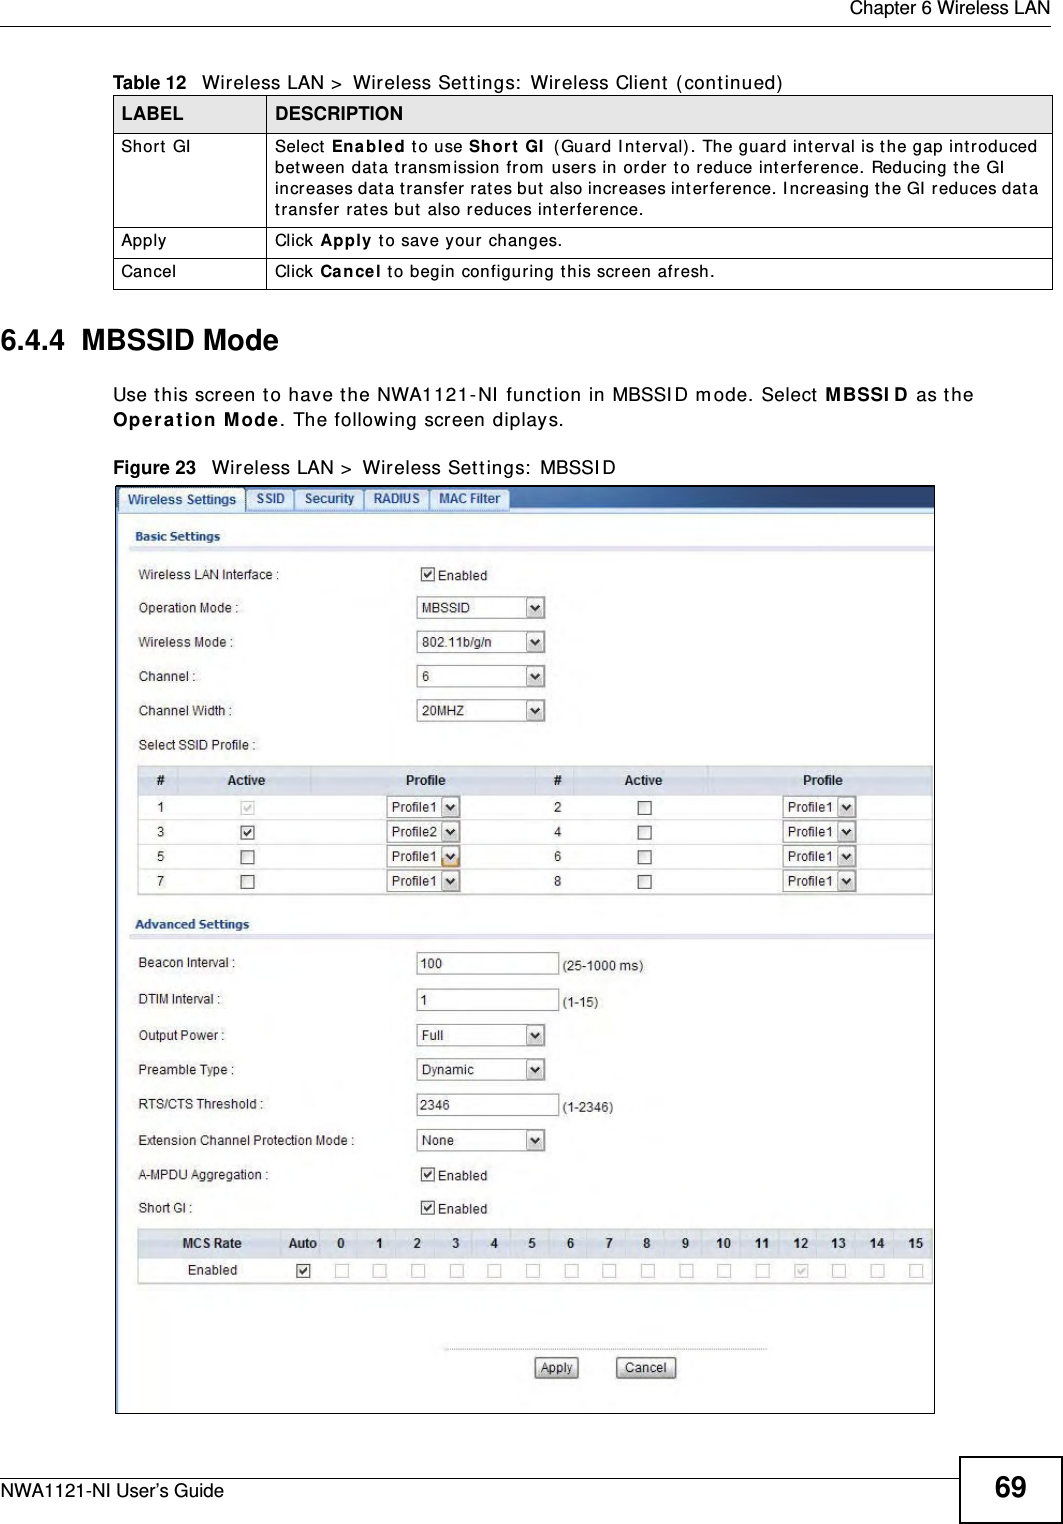  Chapter 6 Wireless LANNWA1121-NI User’s Guide 696.4.4  MBSSID ModeUse this screen to have the NWA1121-NI function in MBSSID mode. Select MBSSID as the Operation Mode. The following screen diplays.Figure 23   Wireless LAN &gt; Wireless Settings: MBSSIDShort GI  Select Enabled to use Short GI (Guard Interval). The guard interval is the gap introduced between data transmission from users in order to reduce interference. Reducing the GI increases data transfer rates but also increases interference. Increasing the GI reduces data transfer rates but also reduces interference.Apply Click Apply to save your changes.Cancel Click Cancel to begin configuring this screen afresh.Table 12   Wireless LAN &gt; Wireless Settings: Wireless Client (continued)LABEL DESCRIPTION